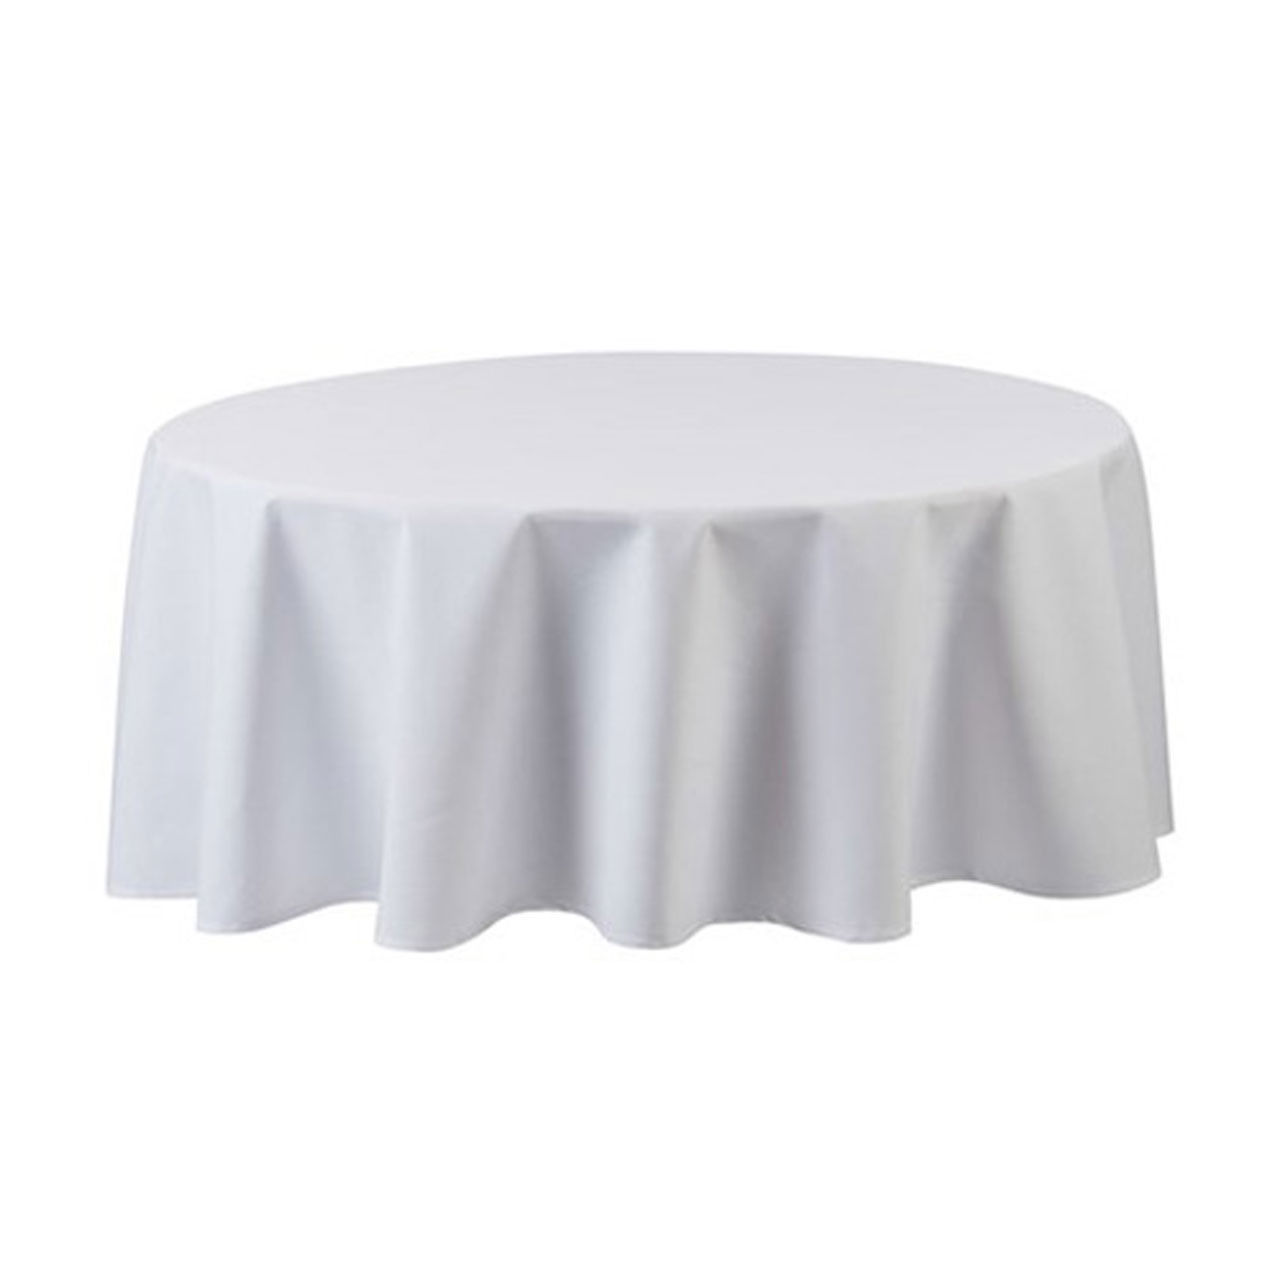 Is the sample a full size 120 round tablecloth?